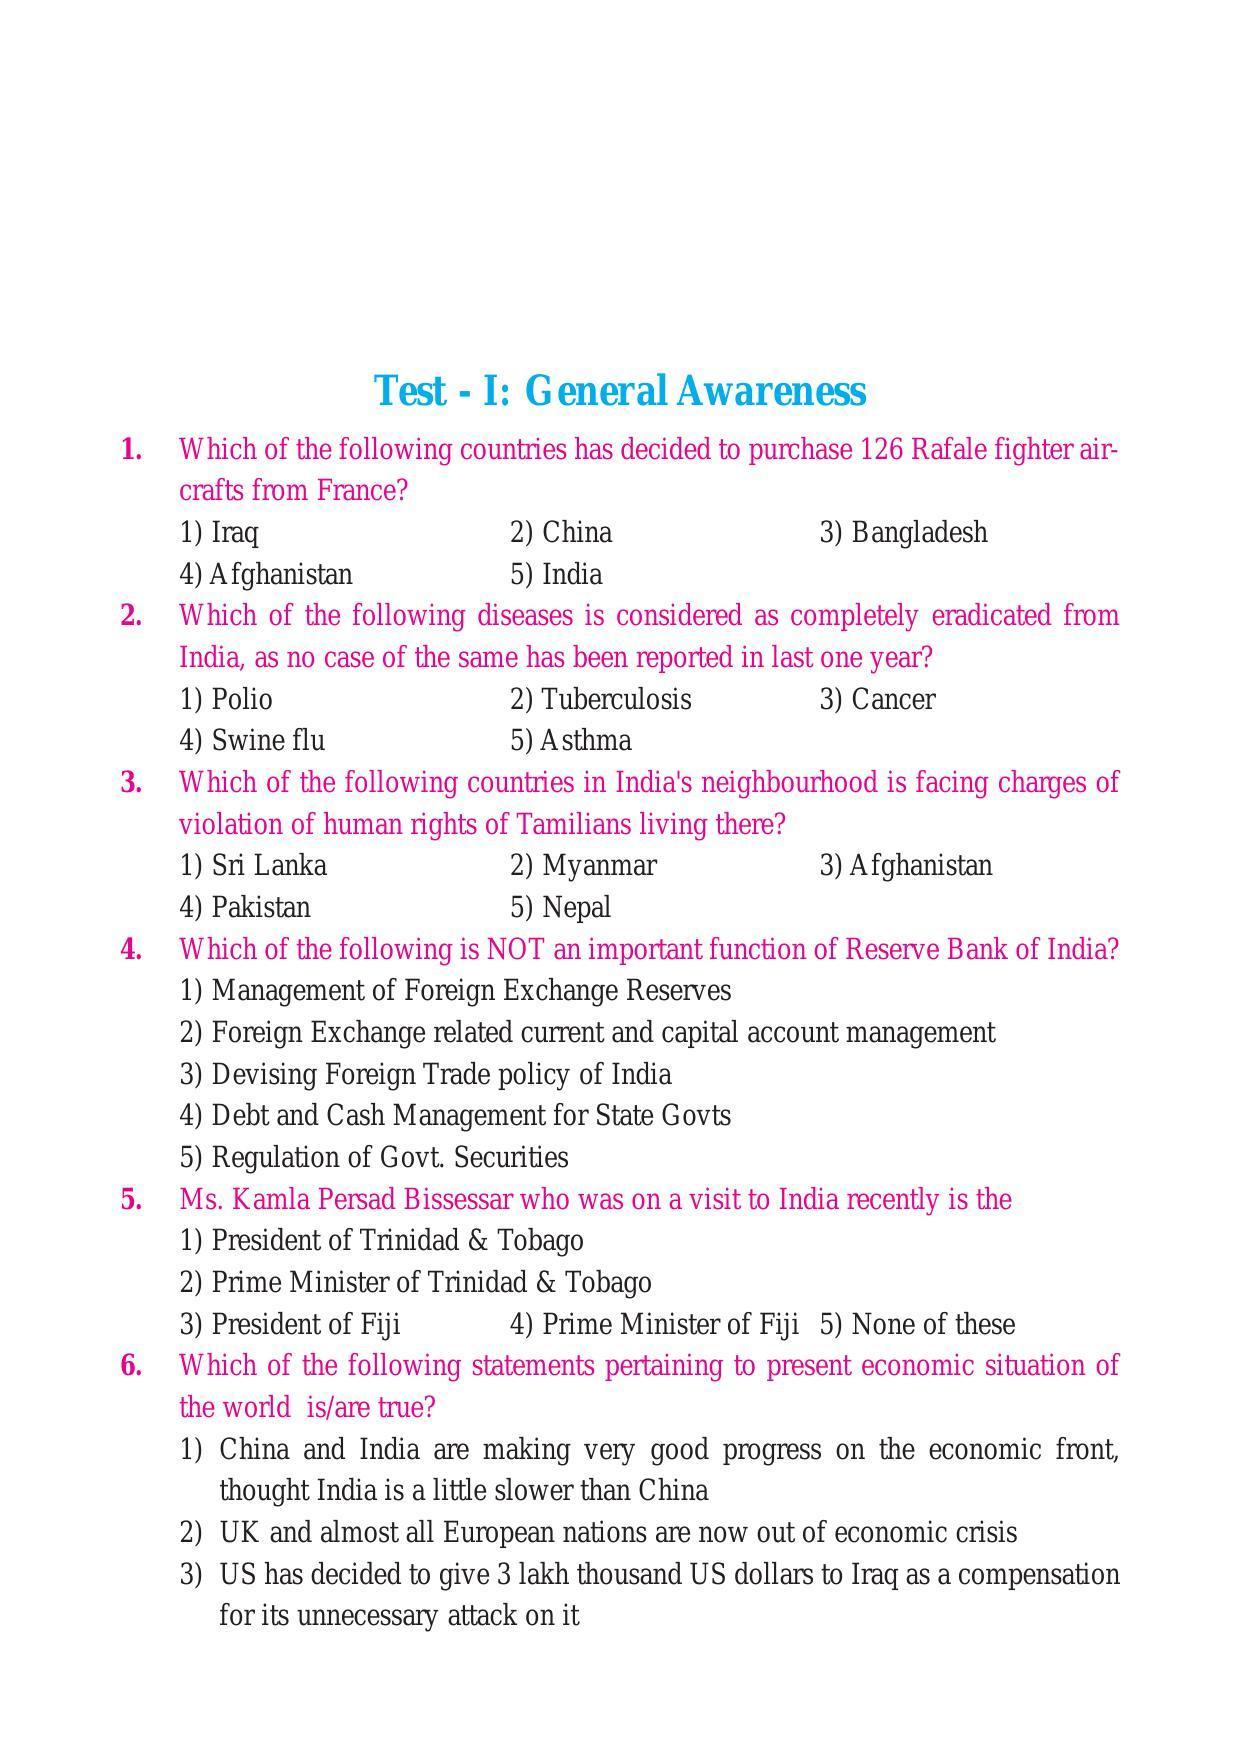 LUVAS Non-Teaching Staff Past Papers - General Awareness - Page 3